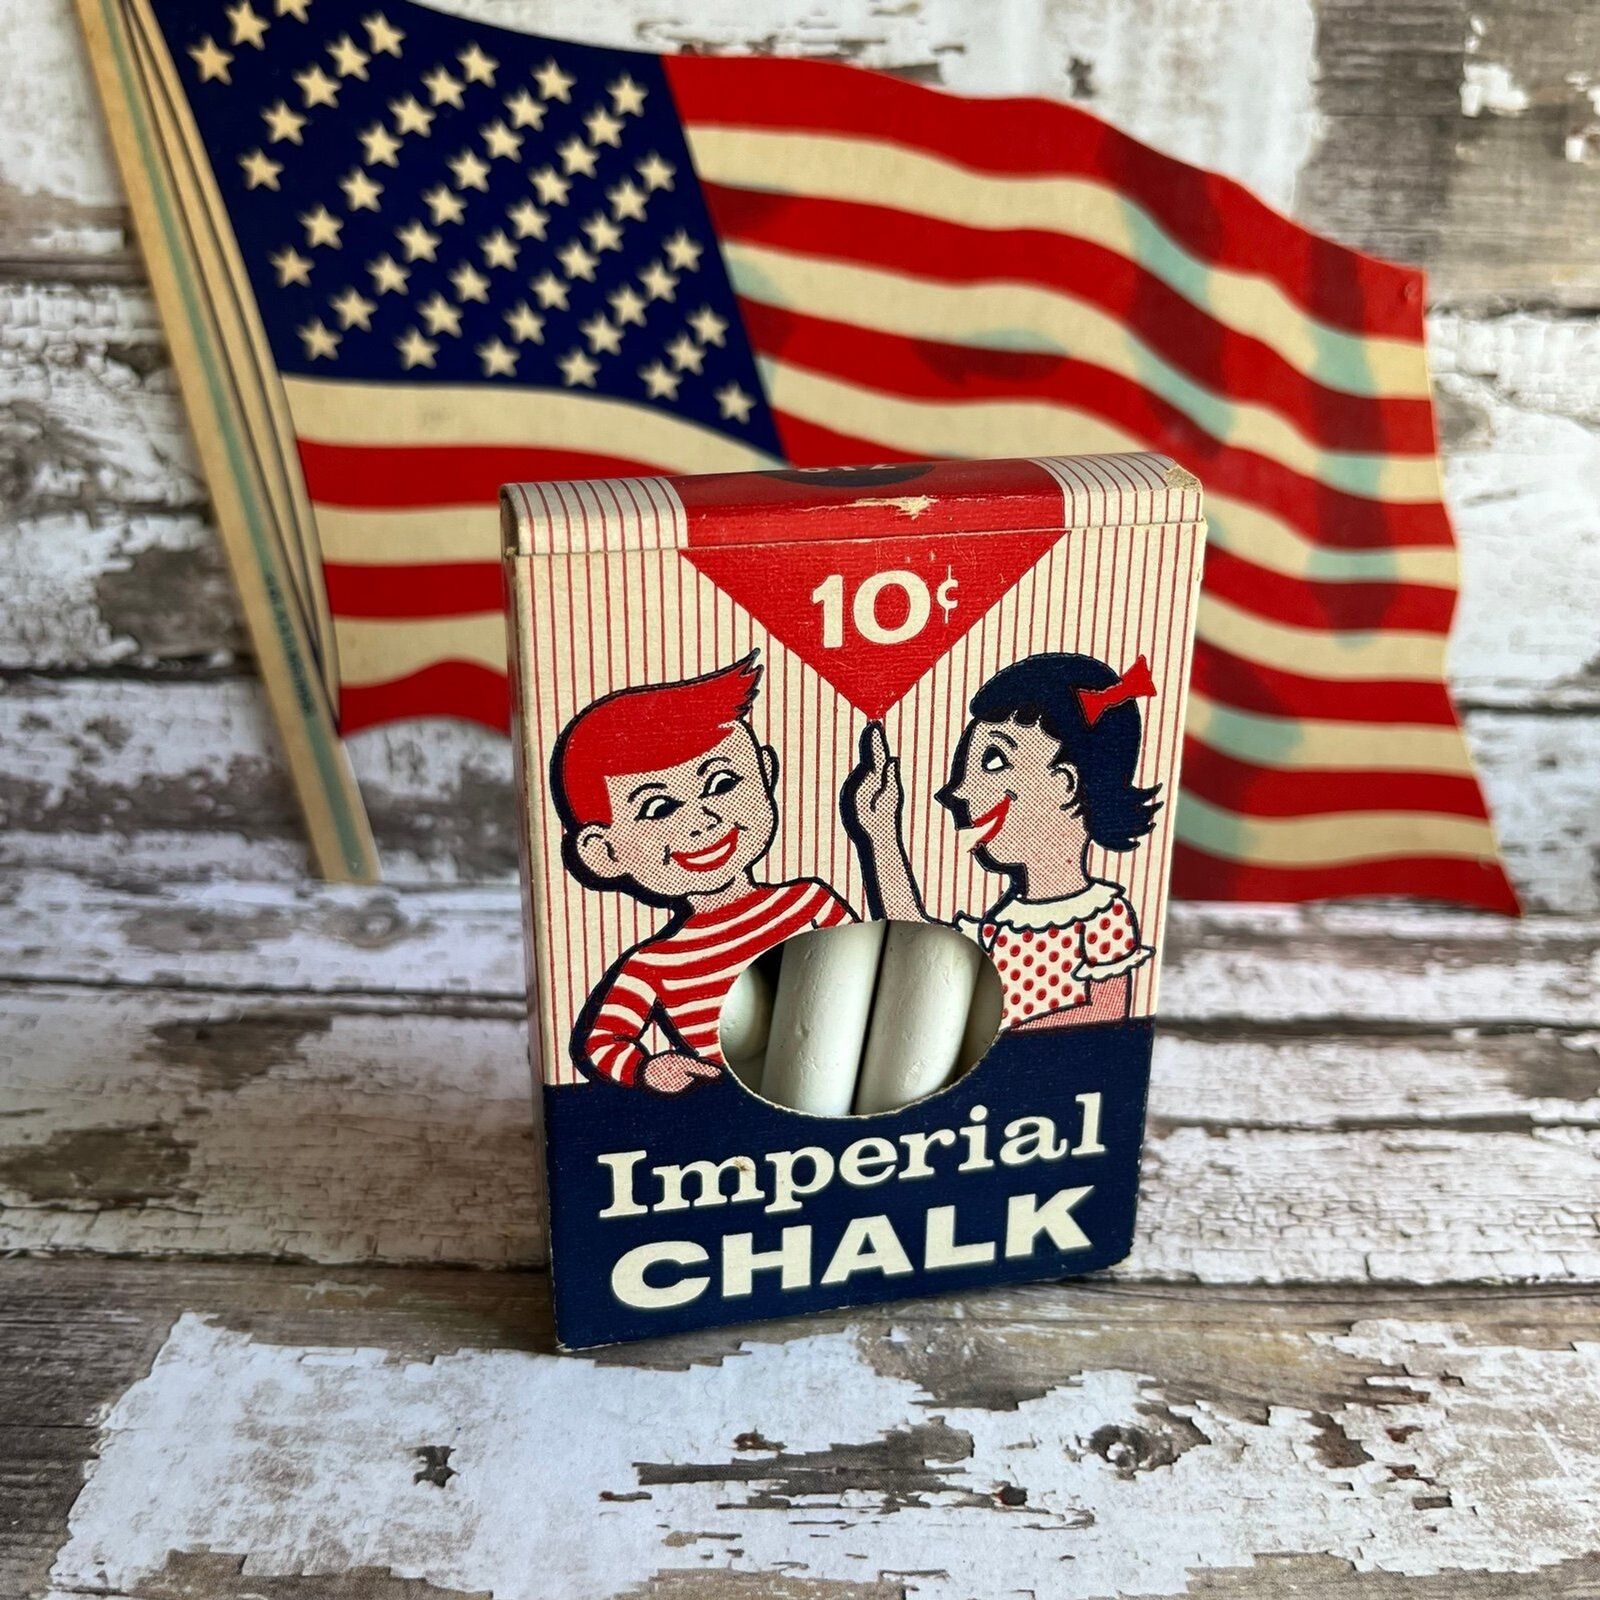 Vintage Finest Quality White Imperial Chalk